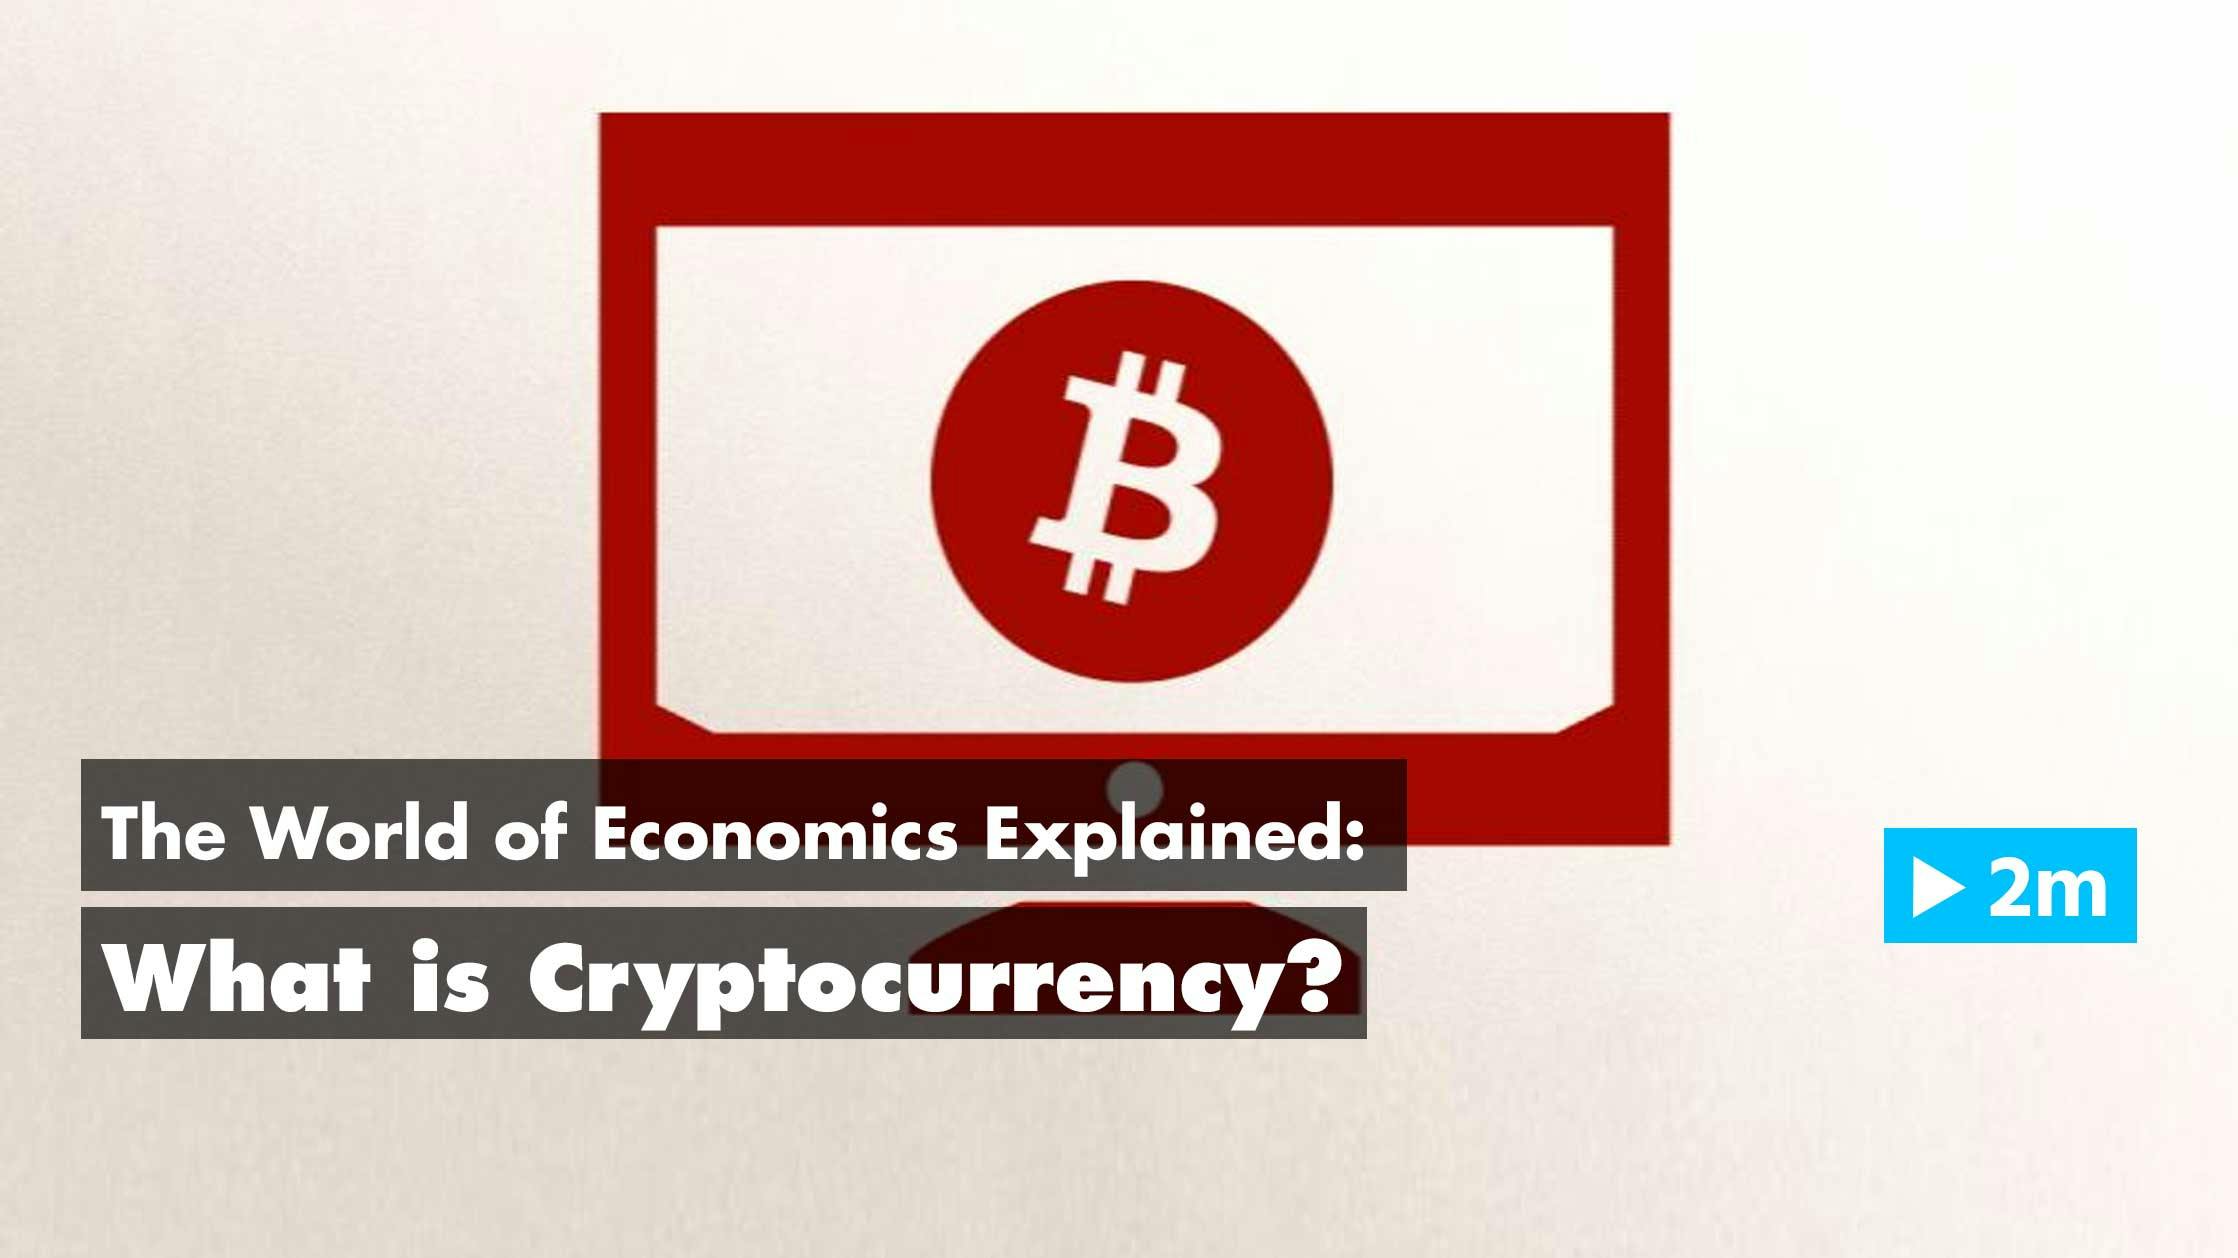 The World of Economics Explained: What is Cryptocurrency?